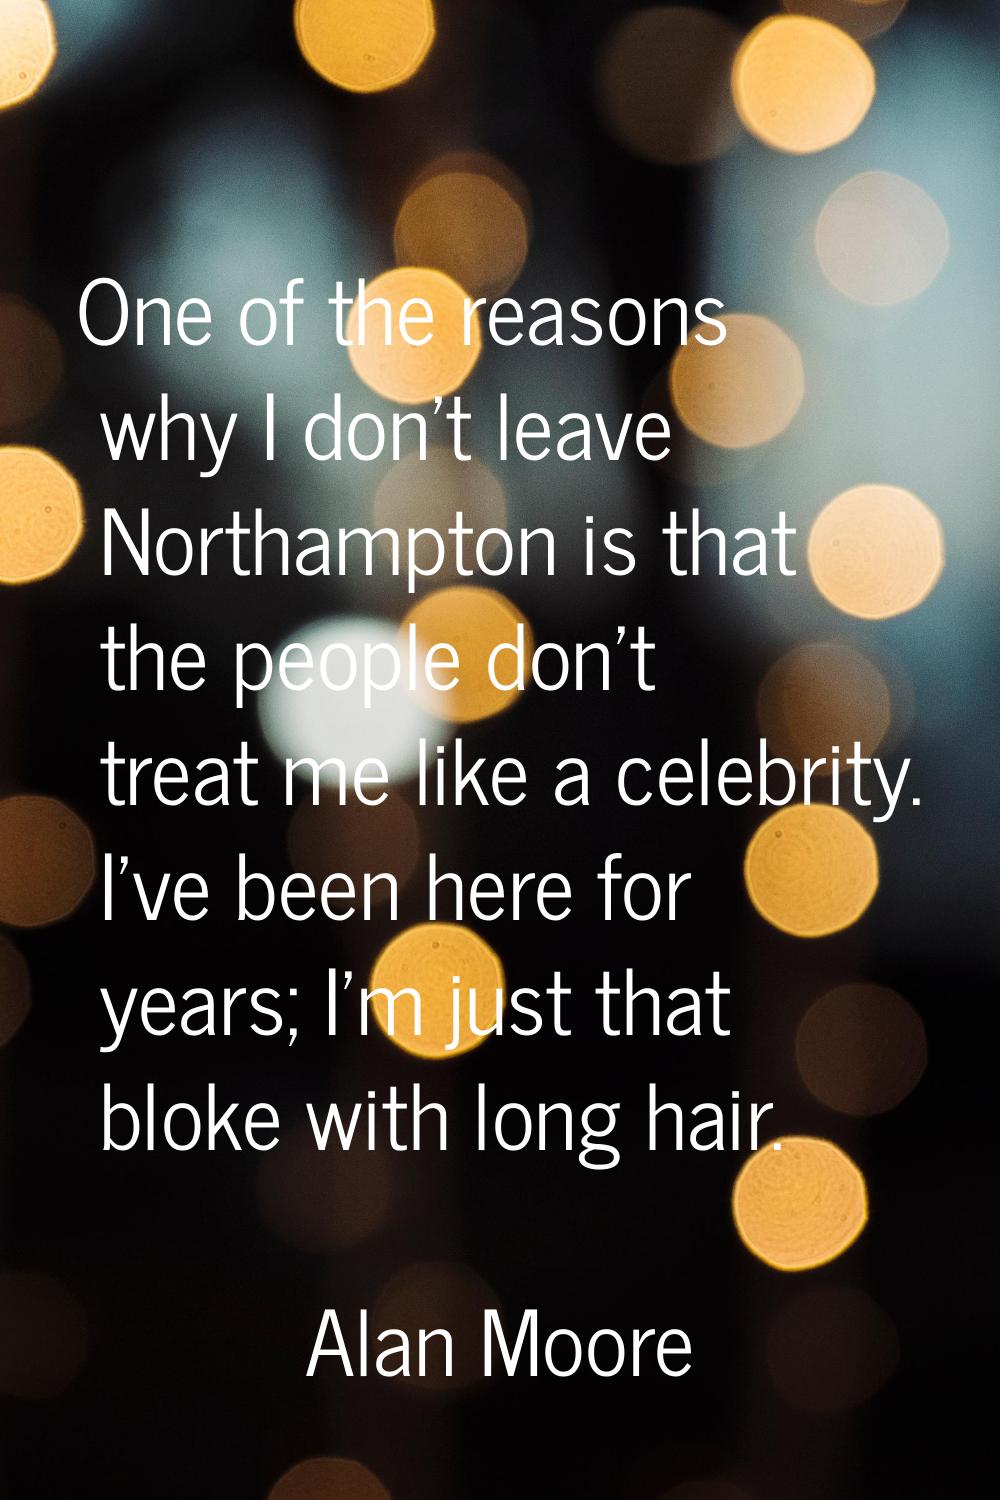 One of the reasons why I don't leave Northampton is that the people don't treat me like a celebrity